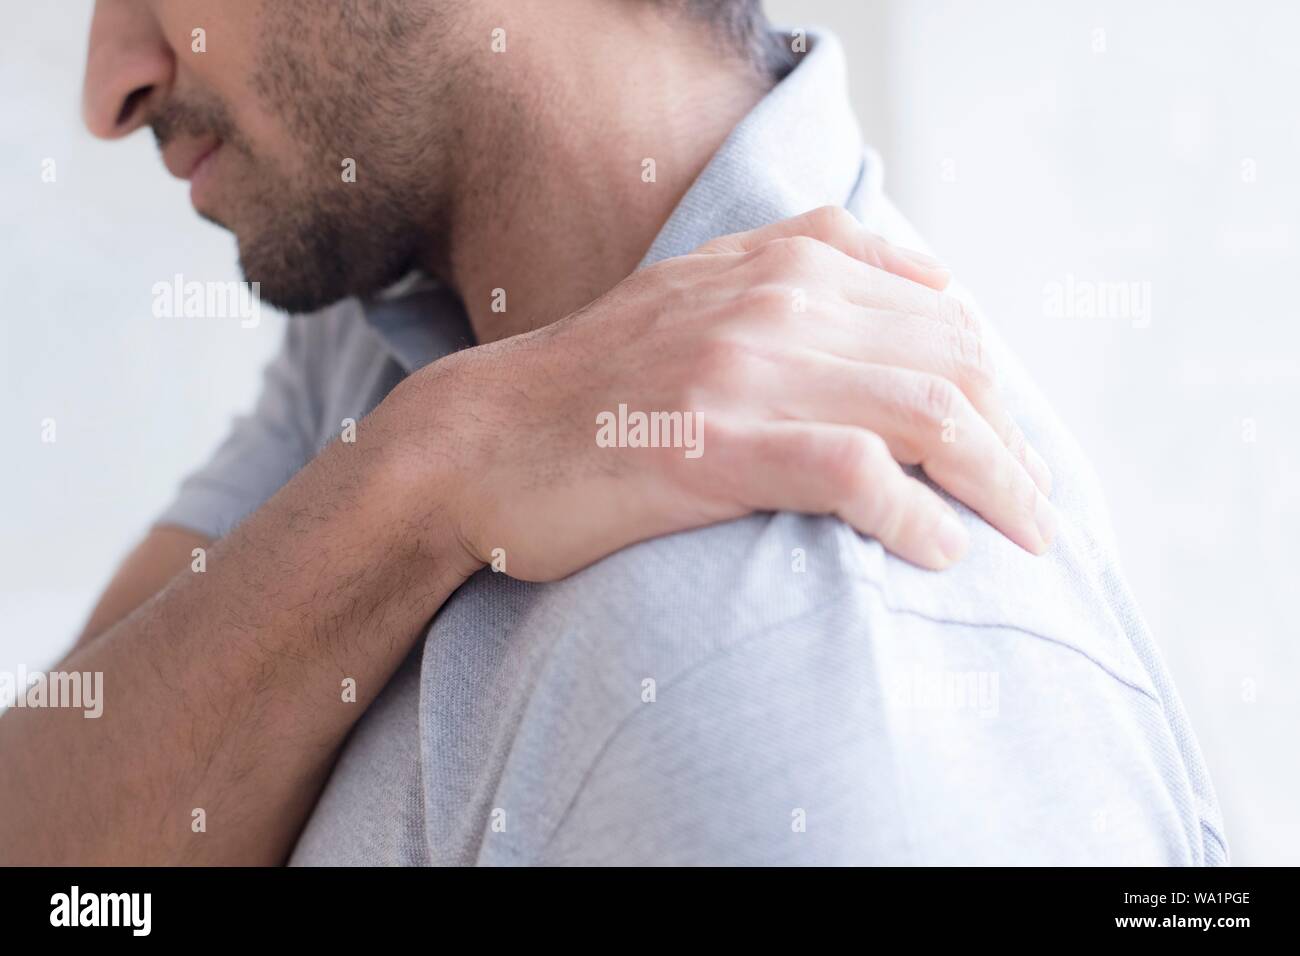 Man touching his shoulder in pain. Stock Photo